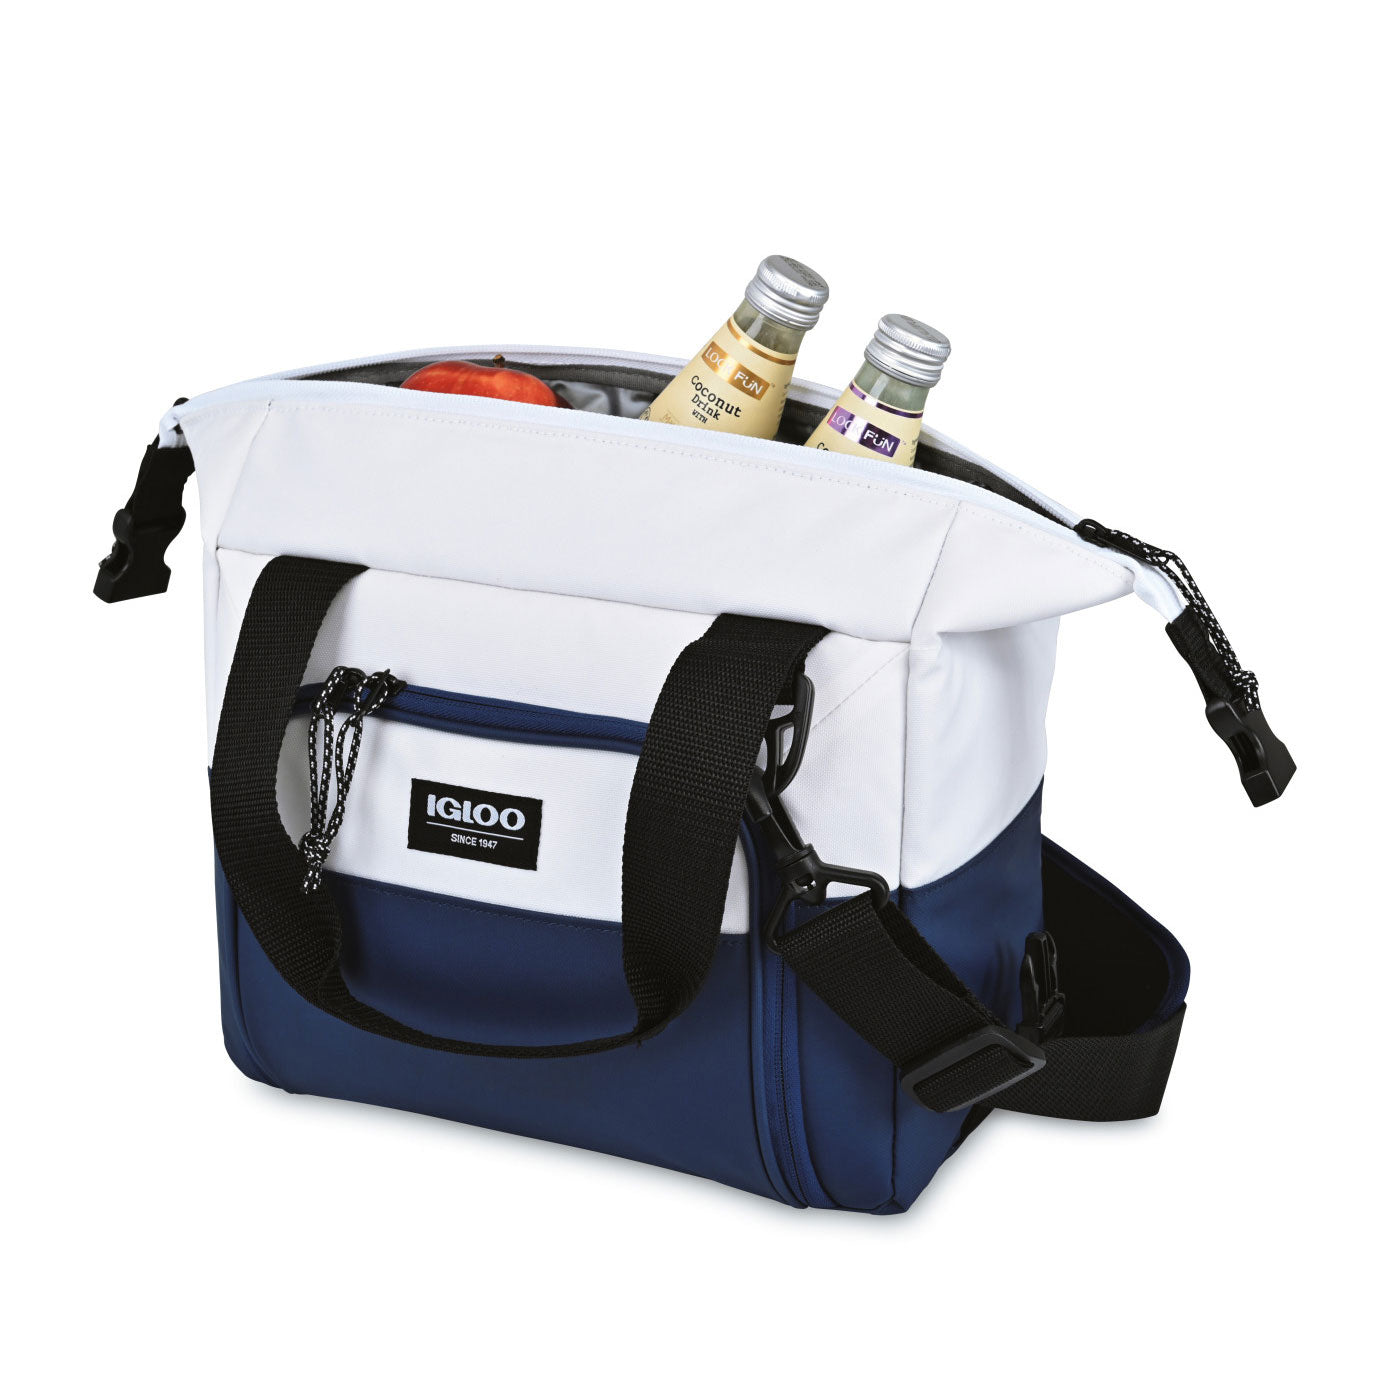 Igloo Seadrift Snap Down Branded 12 Can Coolers, NavyWhite